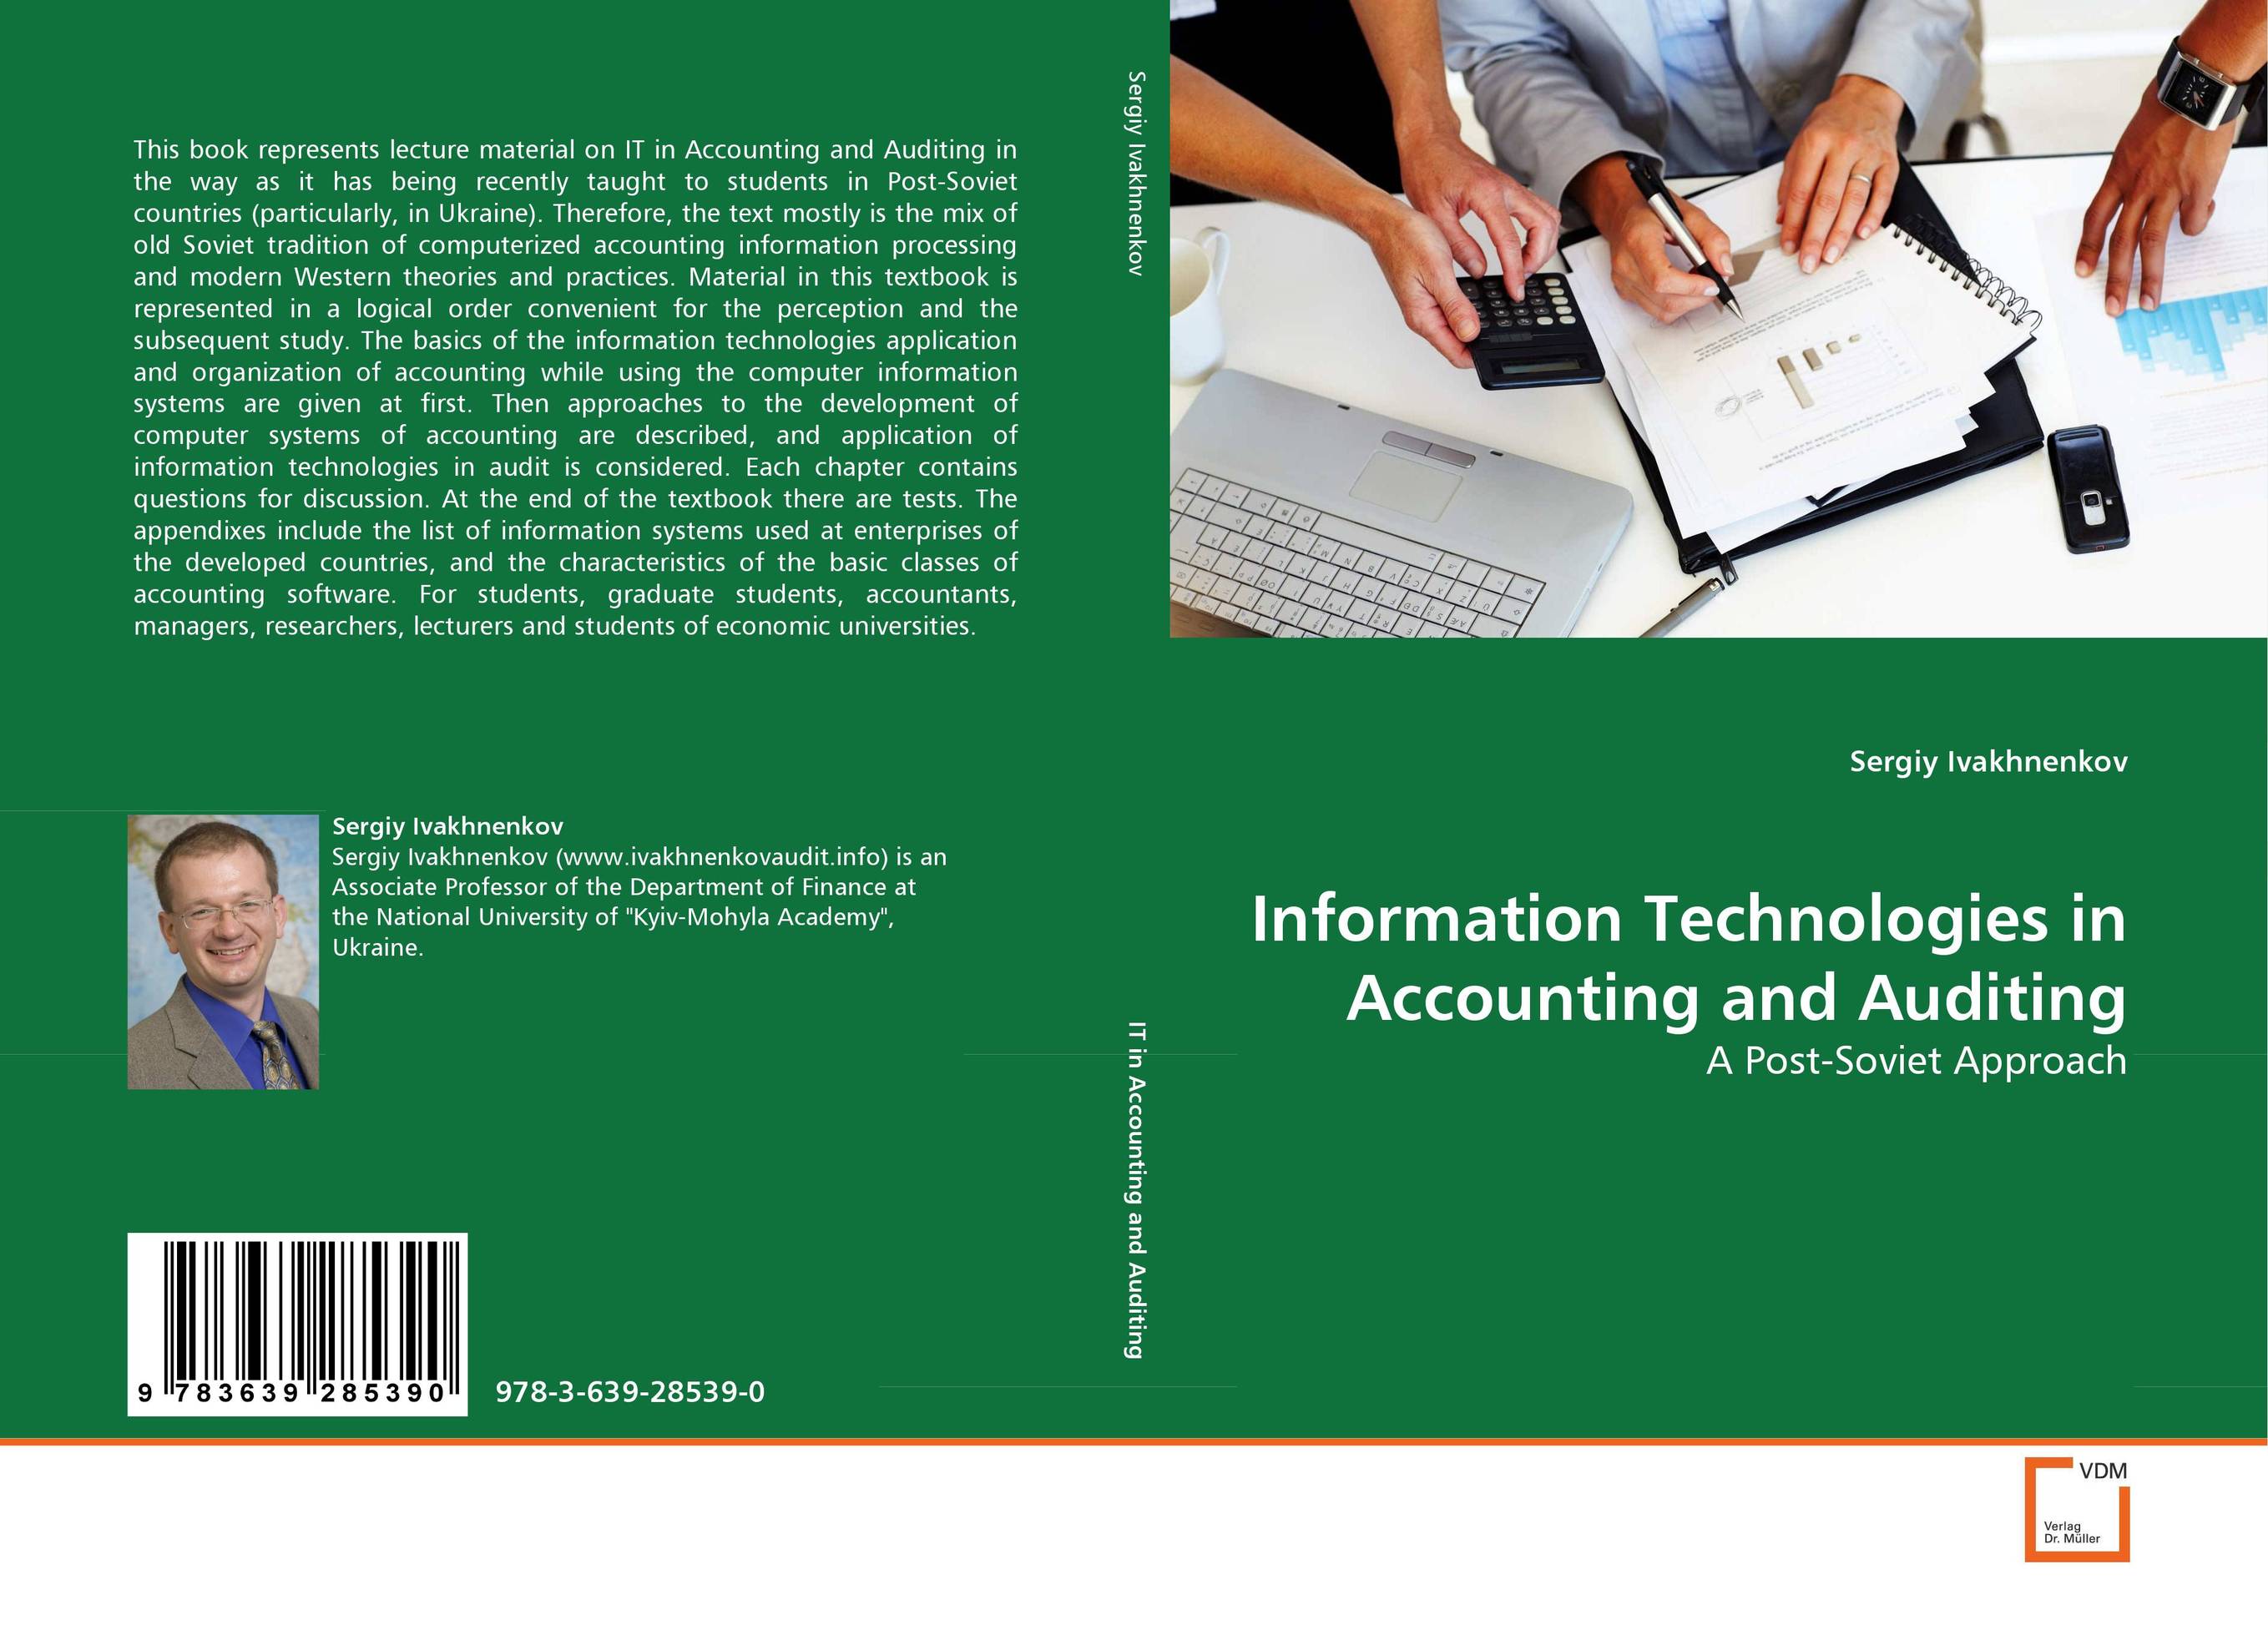 Information Technologies in Accounting and Auditing